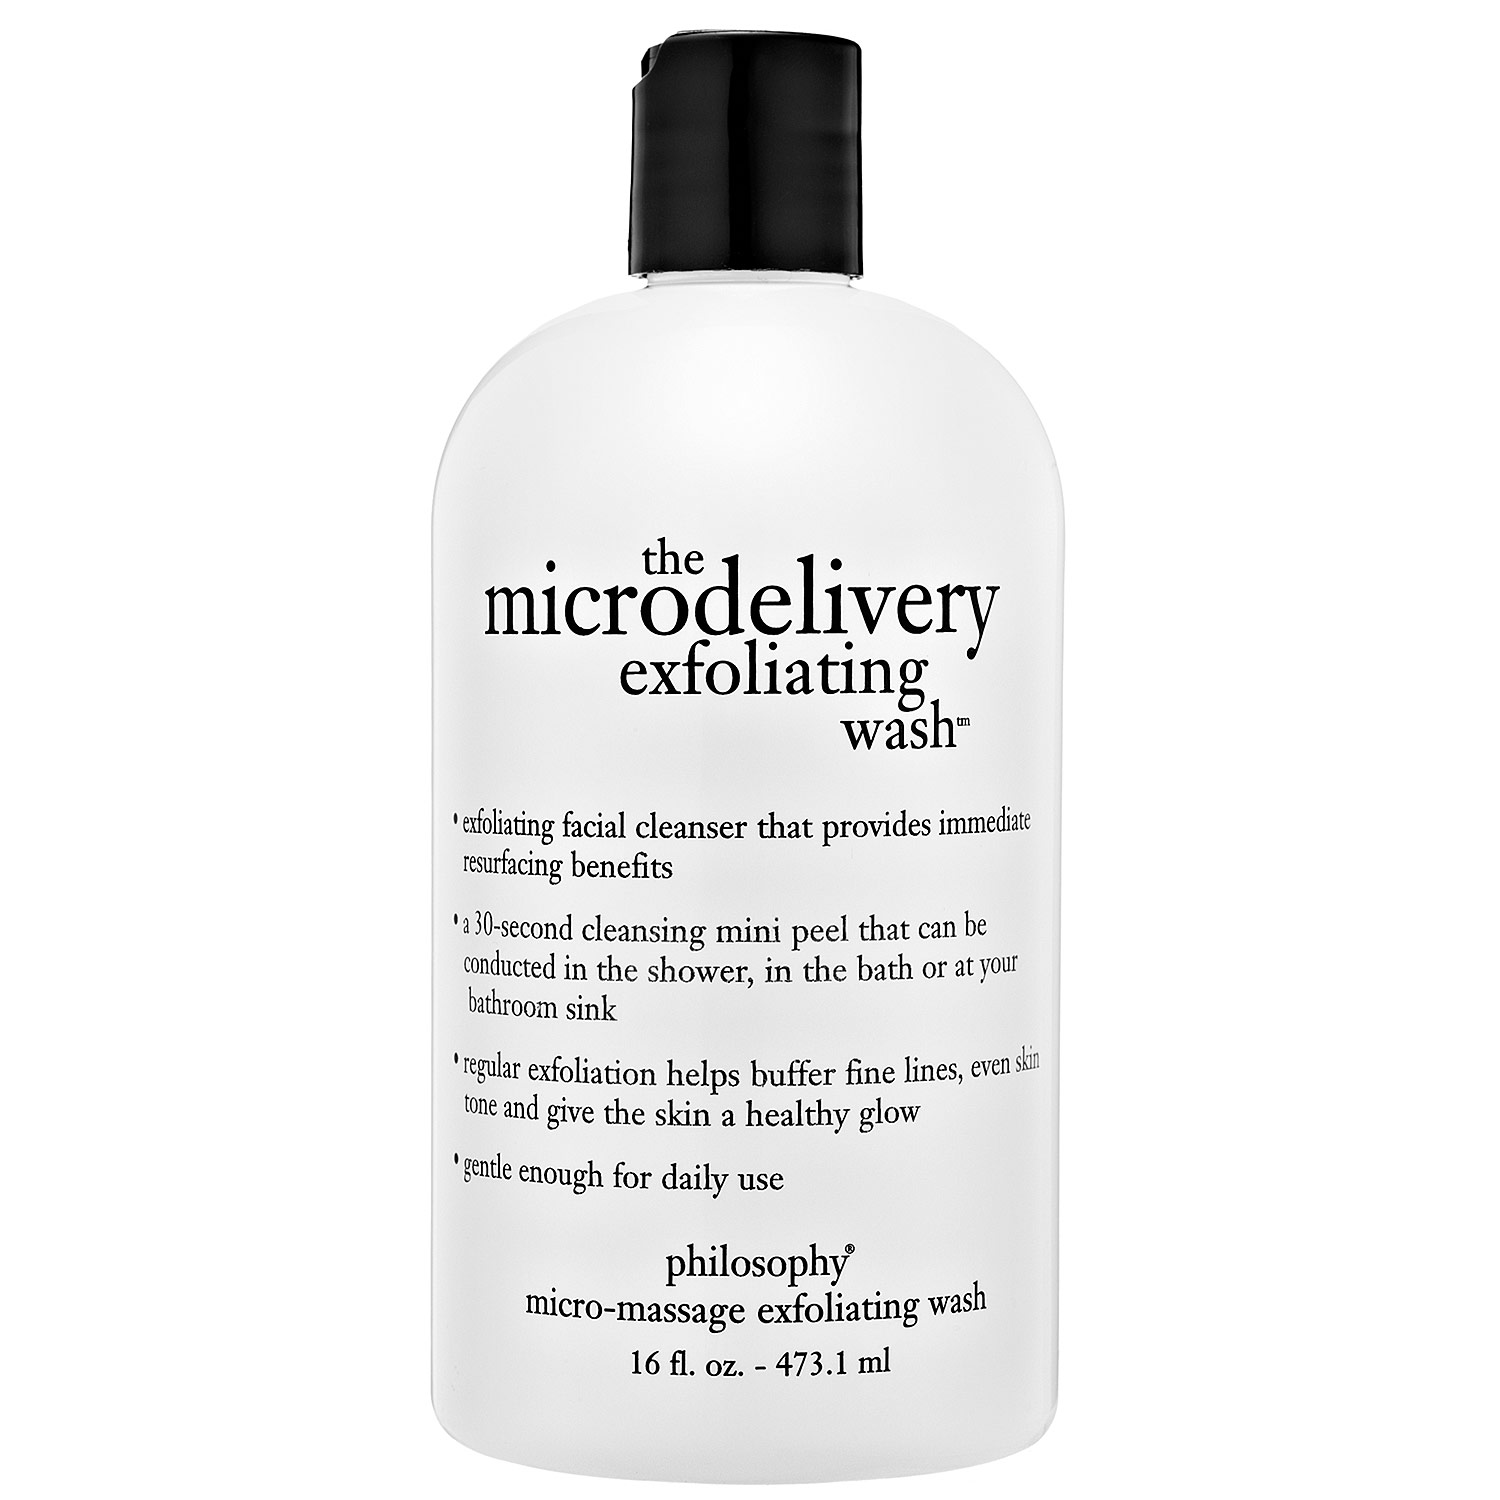 Philosophy Microdelivery Exfoliating Wash, 16 fl oz - image 1 of 2